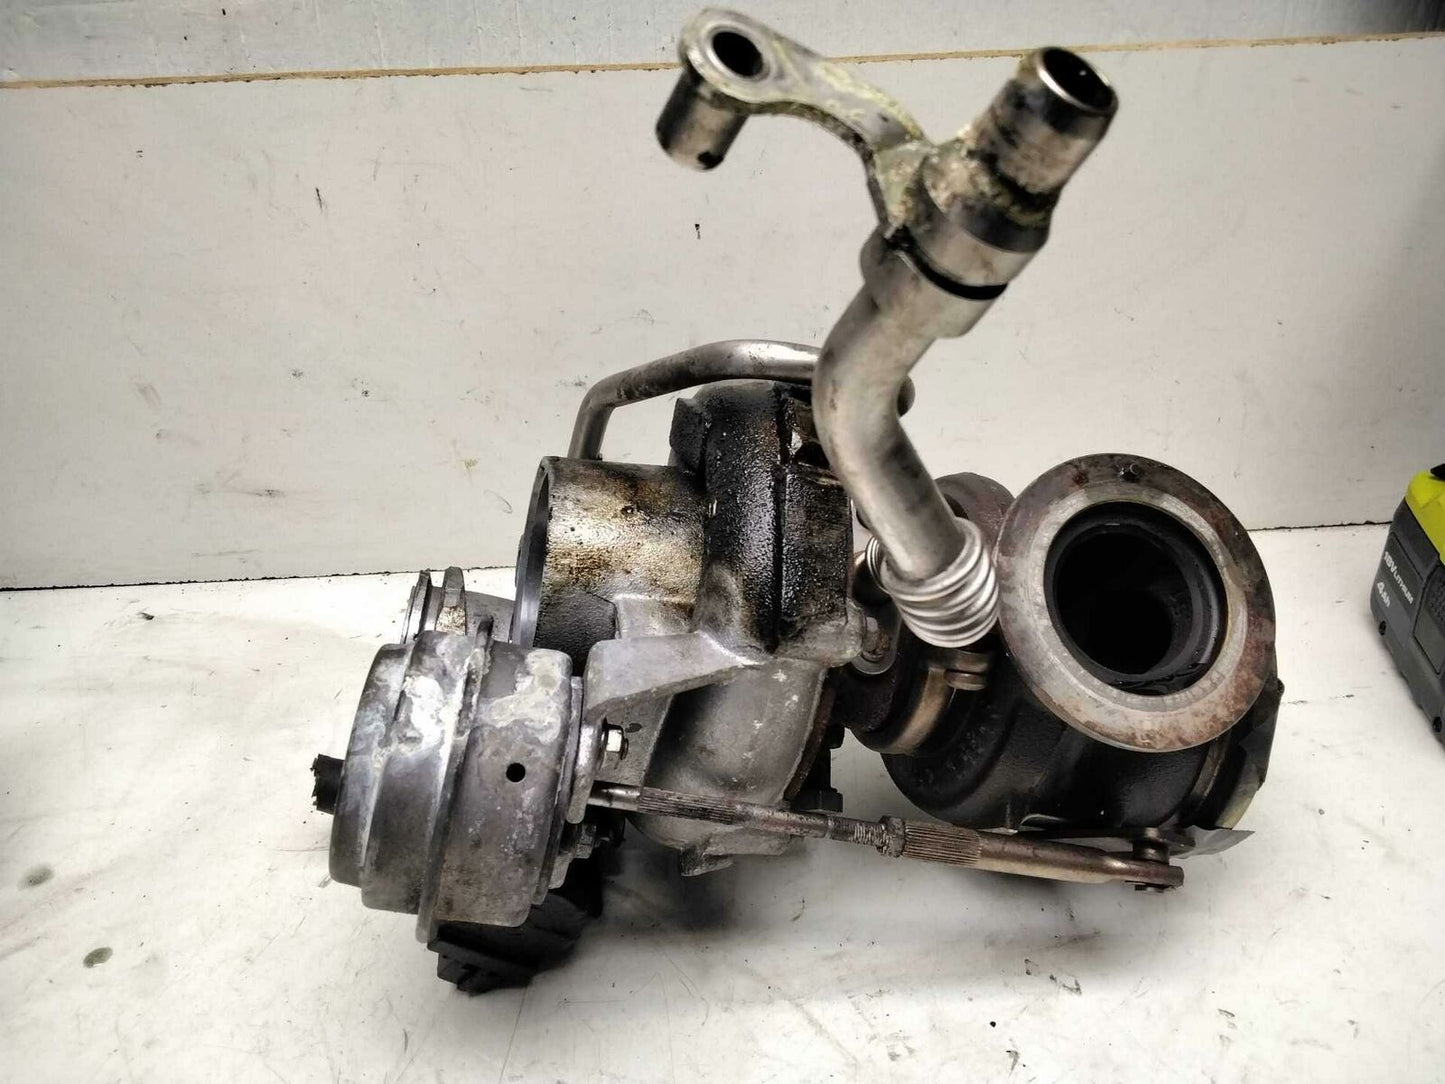 Turbo/supercharger BMW 550I 11 12 13